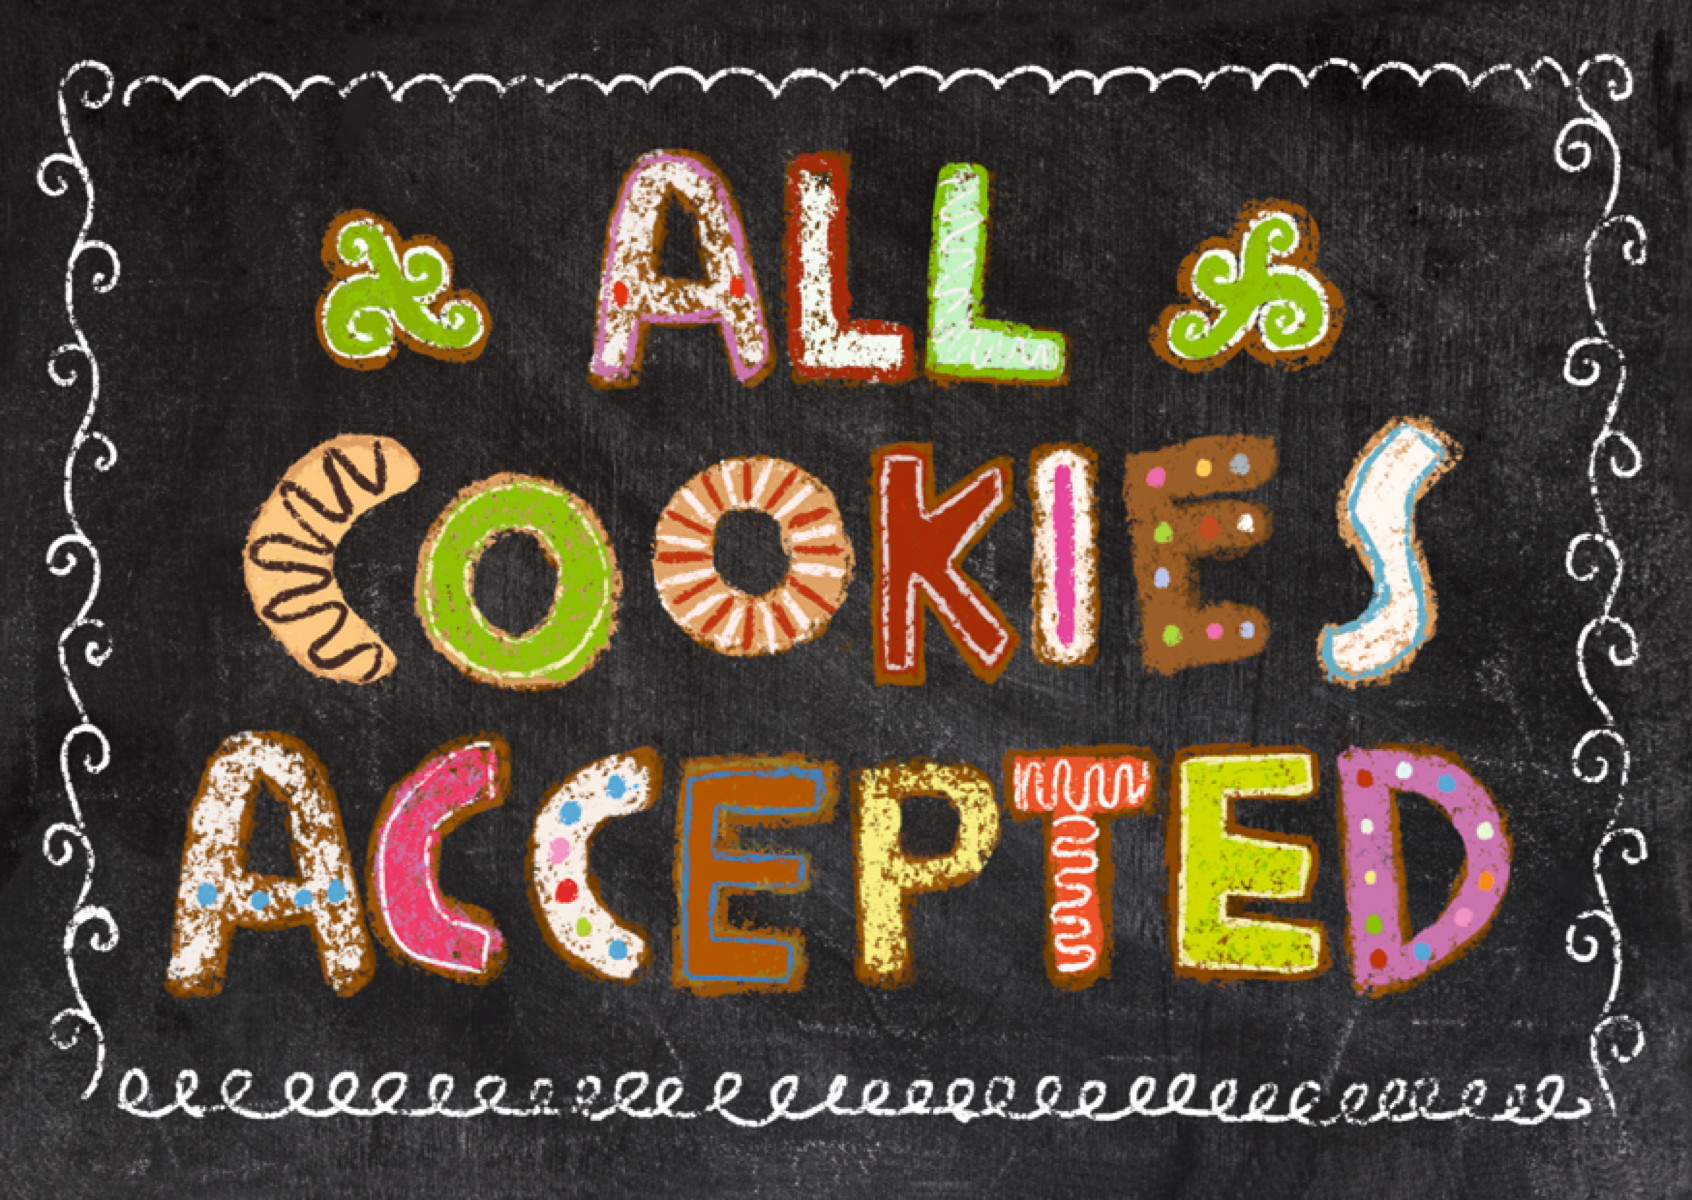 All cookies accepted